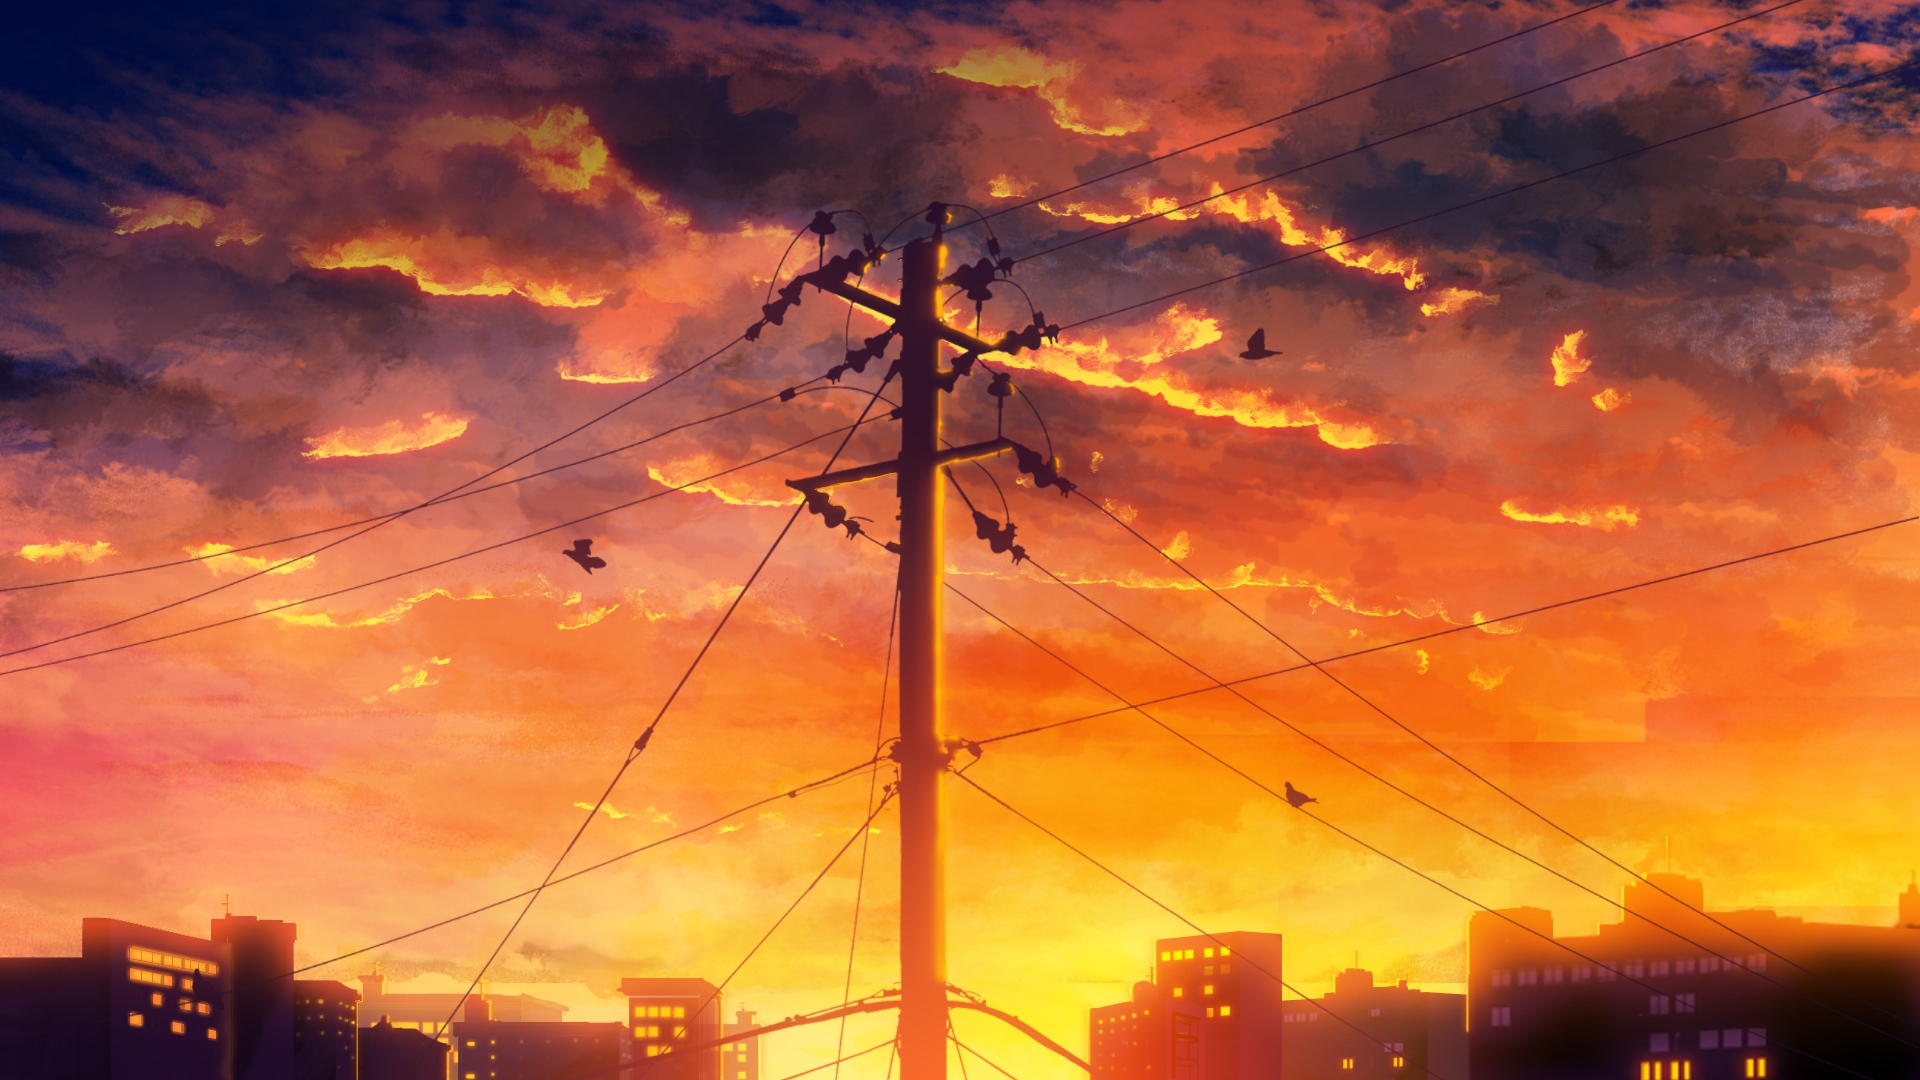 Anime Sunset 1920X1080 Wallpapers - Wallpaper Cave